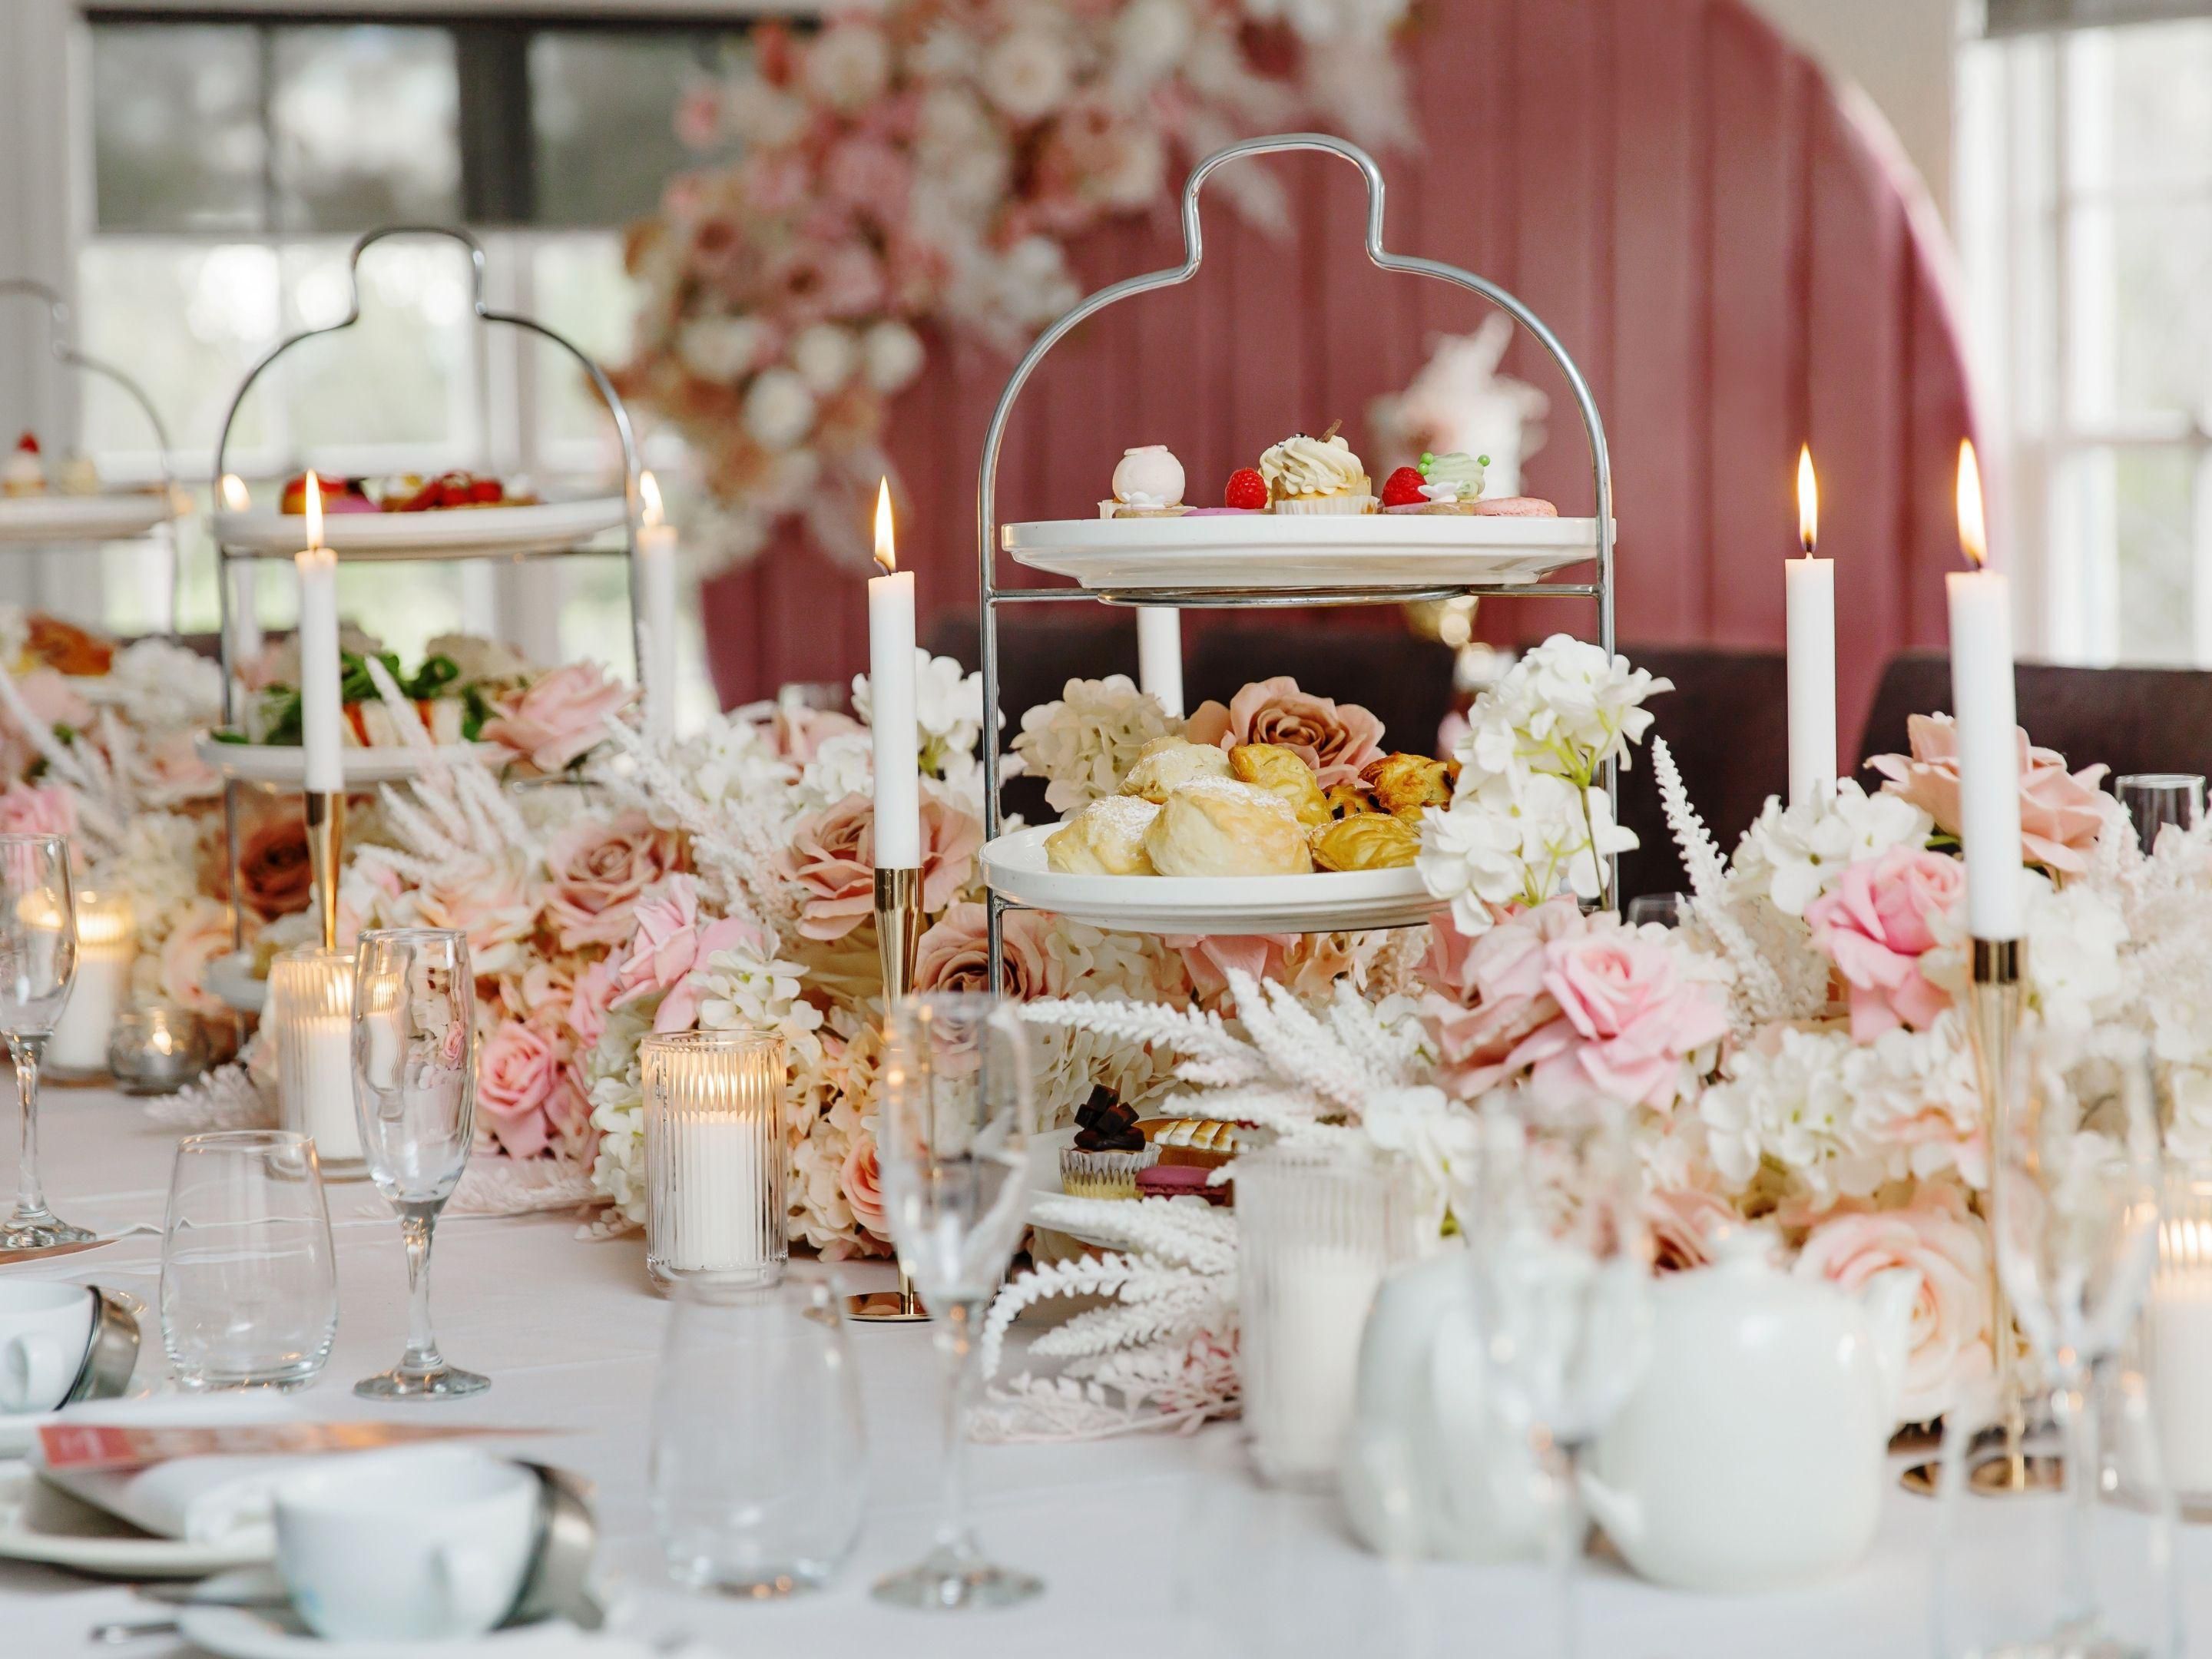 Our high tea experience in the valley is like no other. Sip sparkling wine, delight outside in the sun-drenched gardens and feel yourself melt into the moment. A perfect way to celebrate a baby shower, birthday, bridal shower, kitchen tea, or simply to get together and share a little indulgence.  